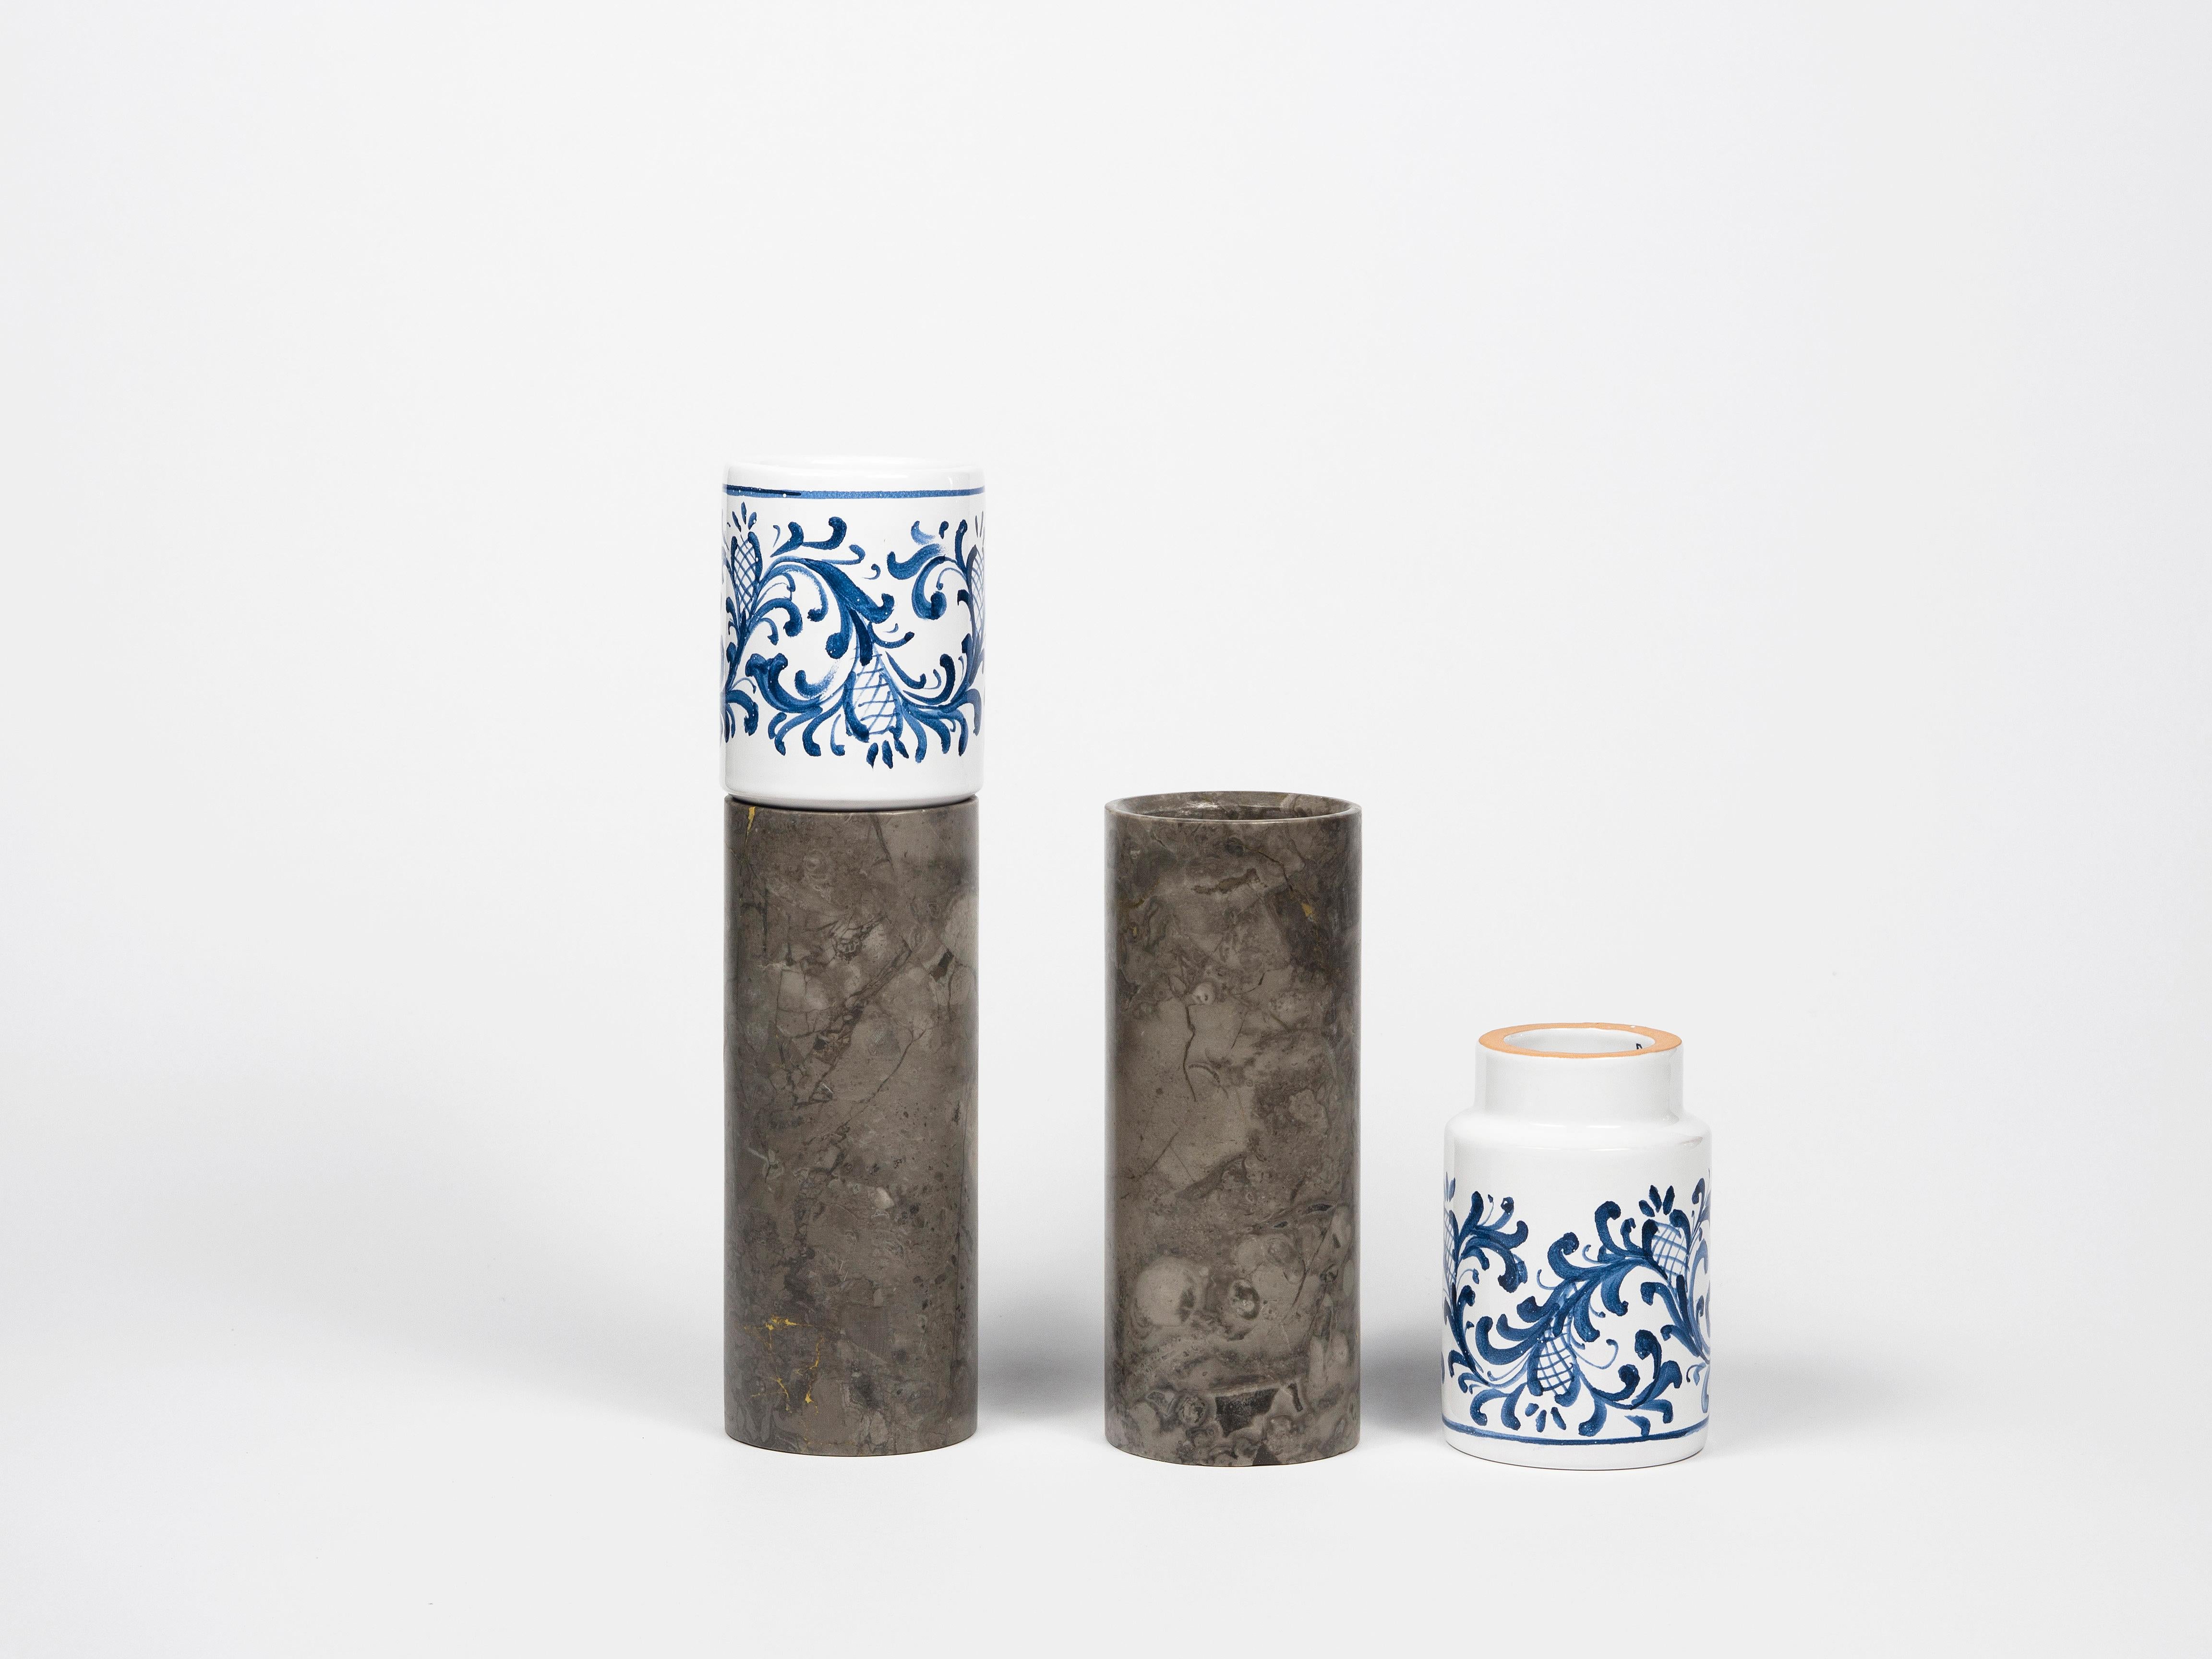 Vase for cut flowers in marble and ceramic that tells of a slow and gradual process of learning of man from nature. Man observes, inspires, imitates and experiments to create what will become innovation / evolution, the tradition of an era. The